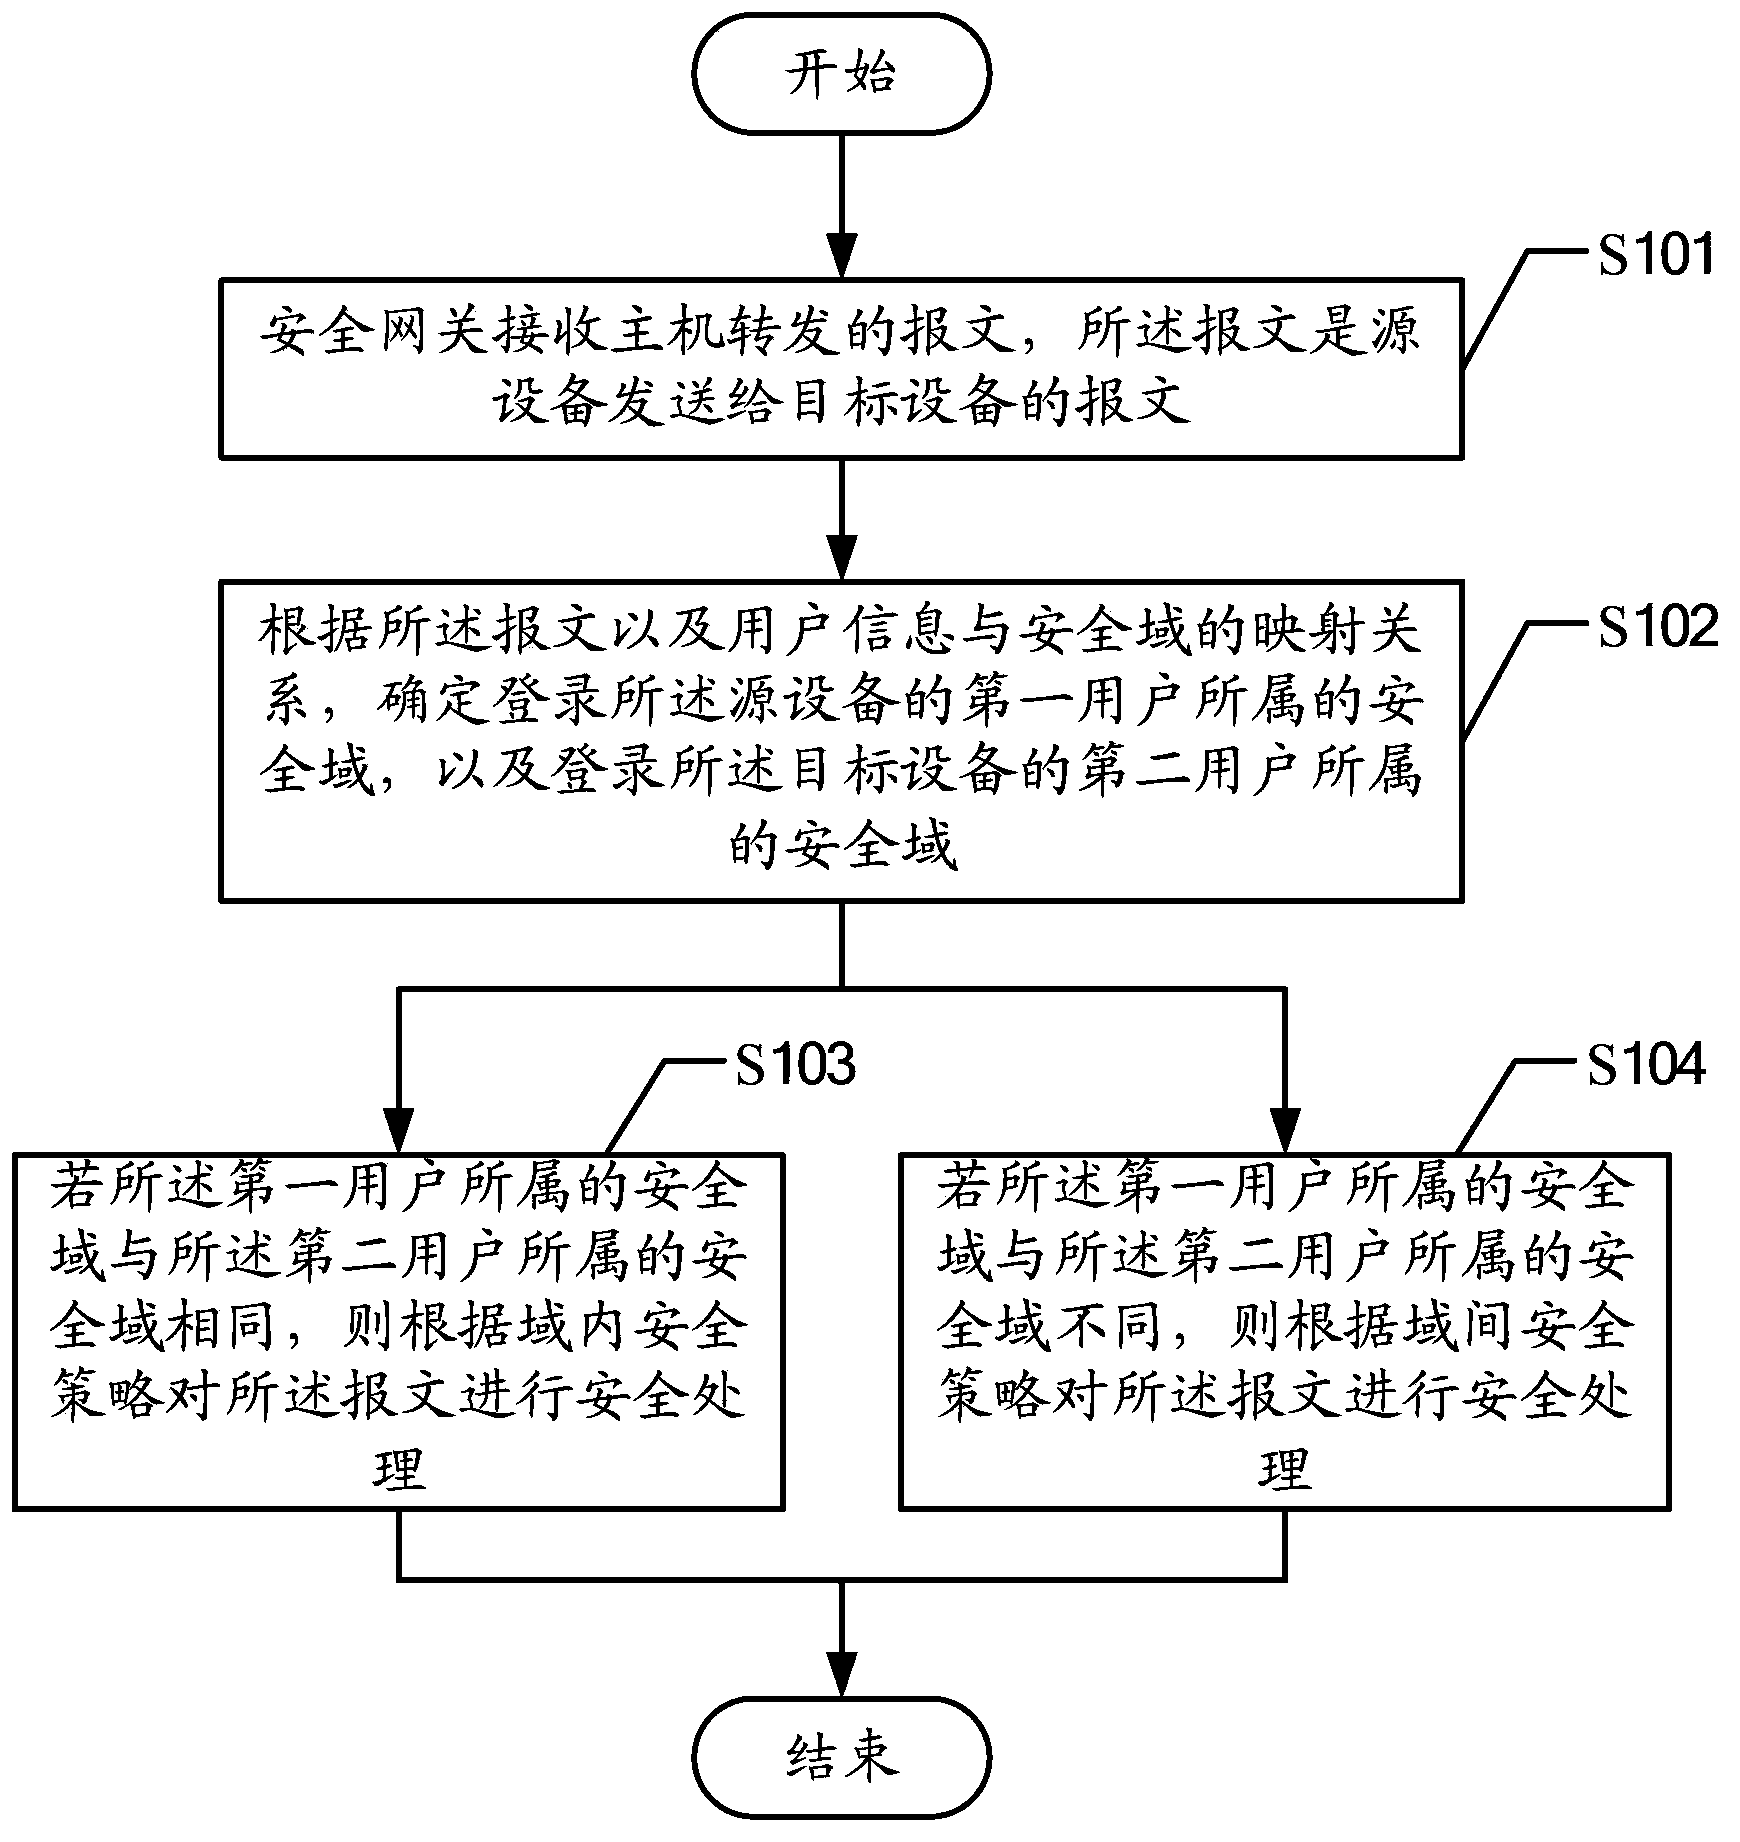 Communication security processing method, apparatus and system